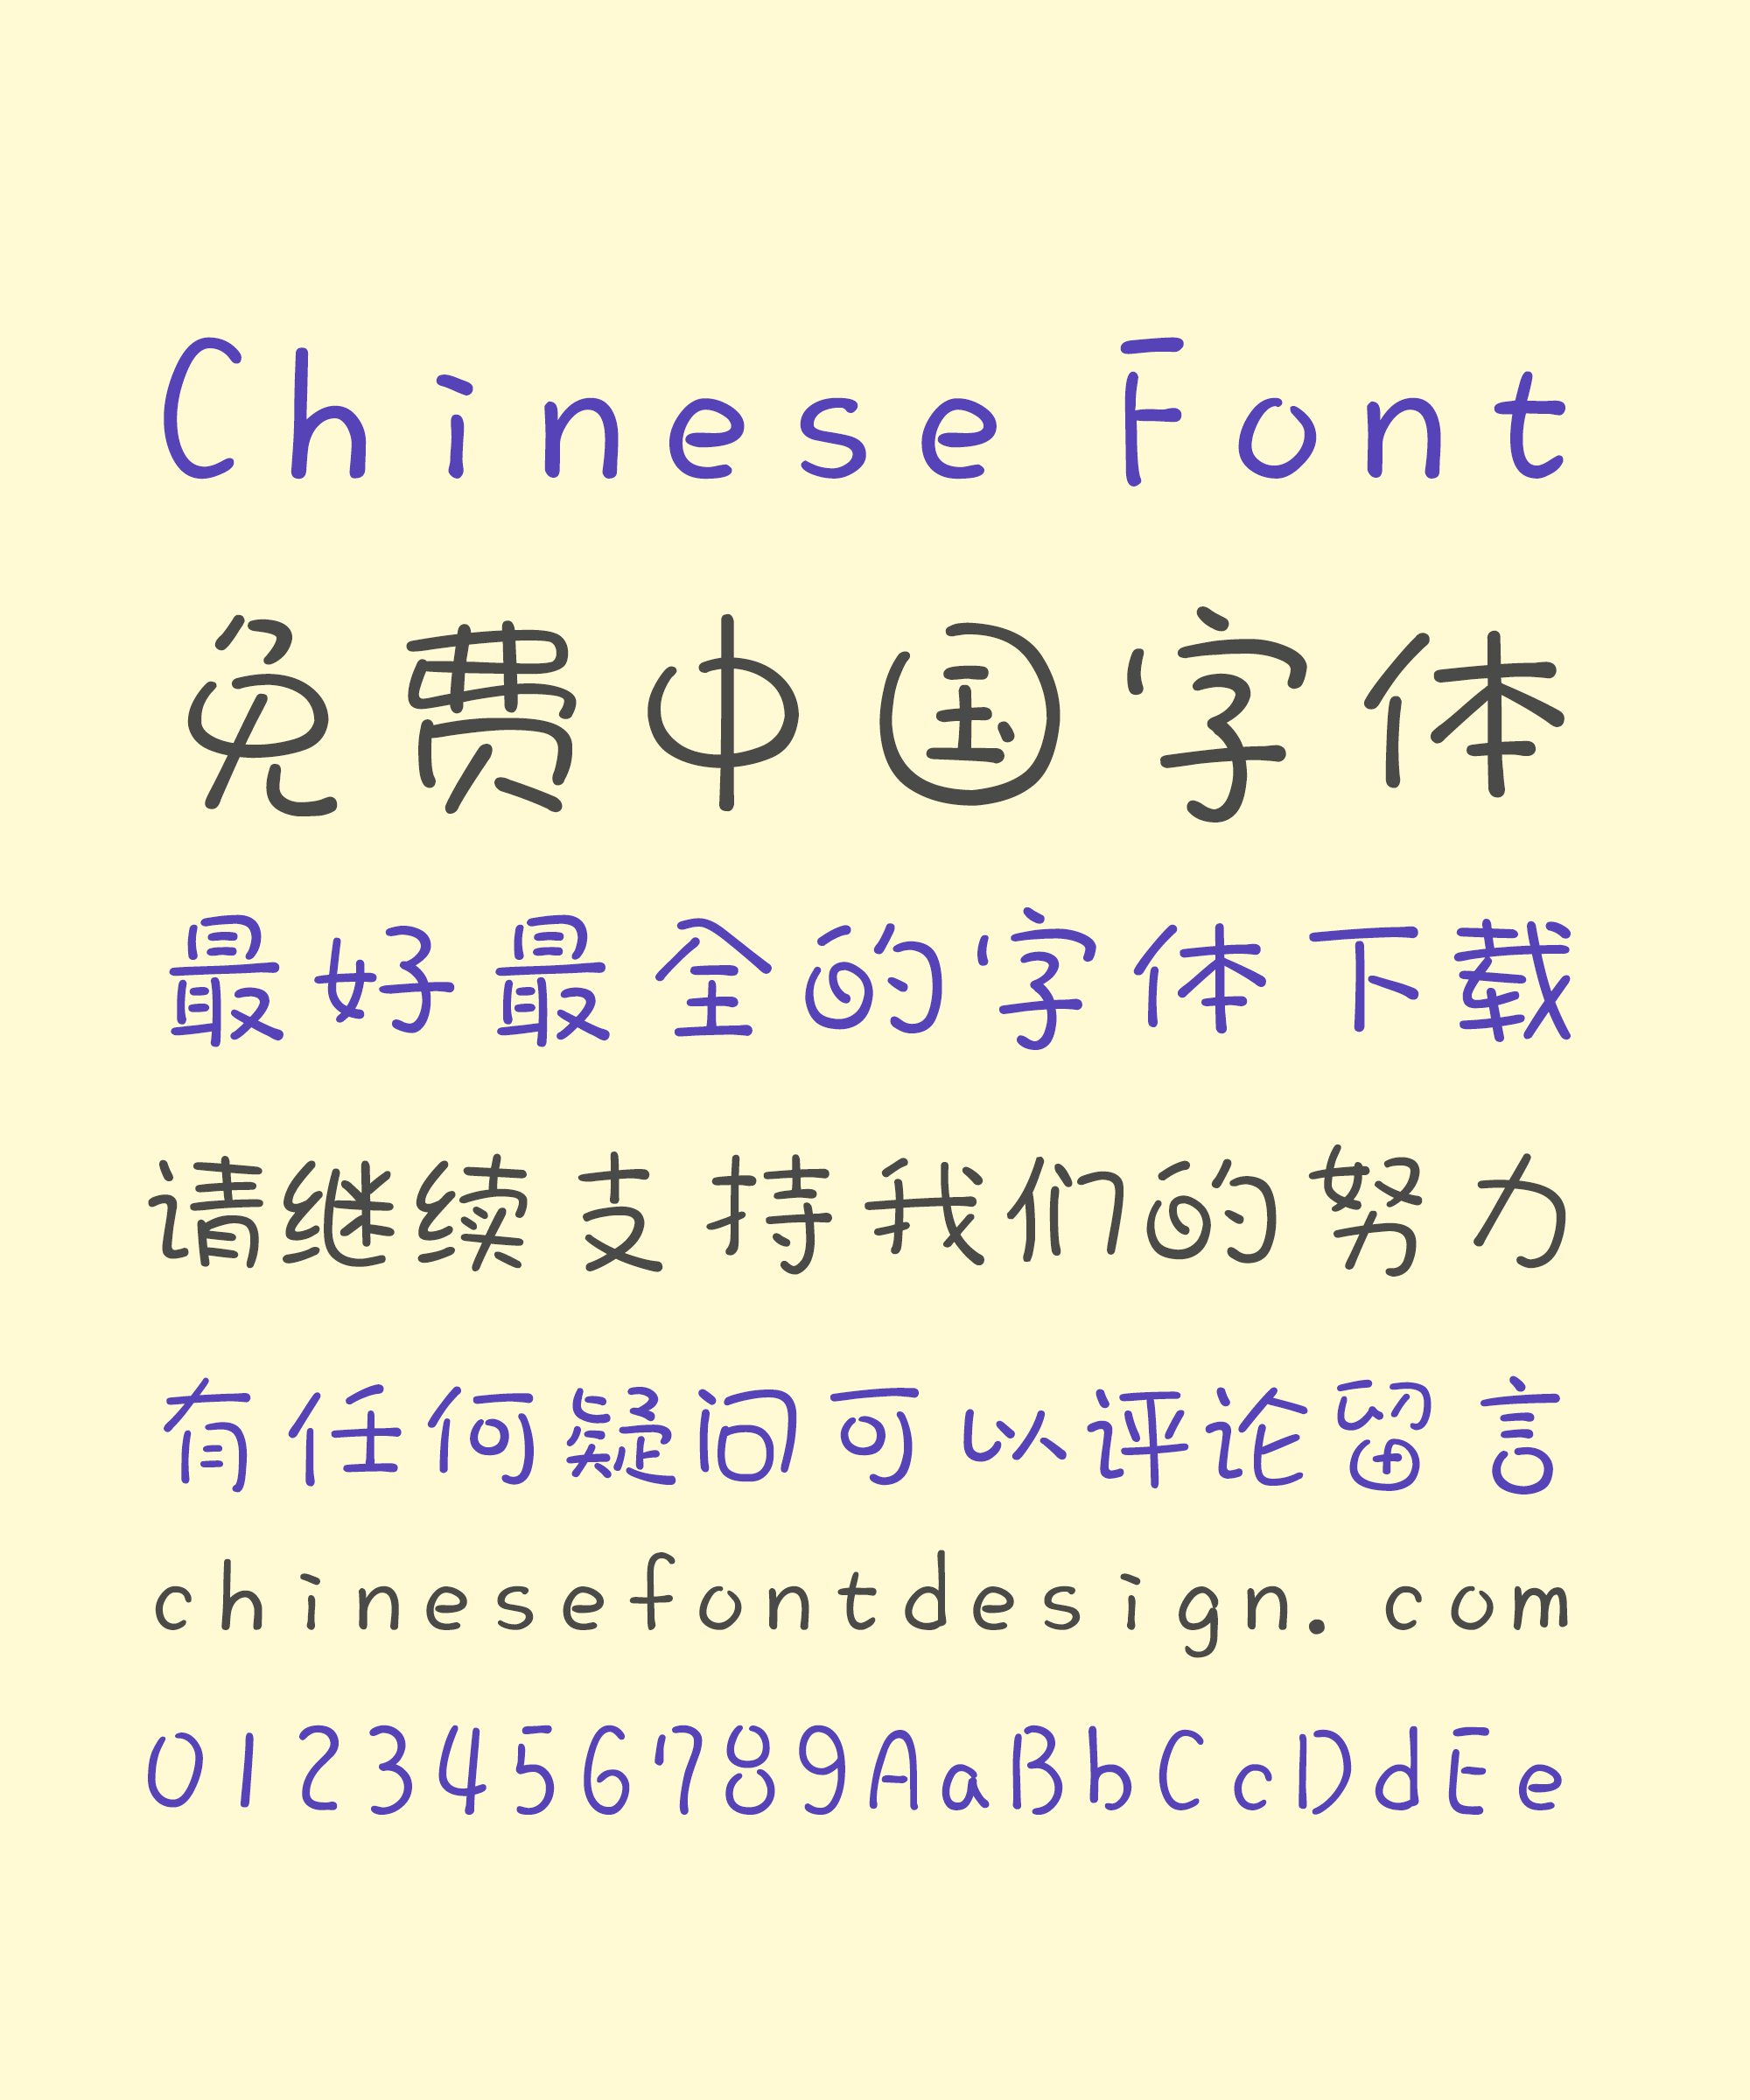 Funny Aunt- Handwriting Chinese Font -Simplified Chinese Fonts